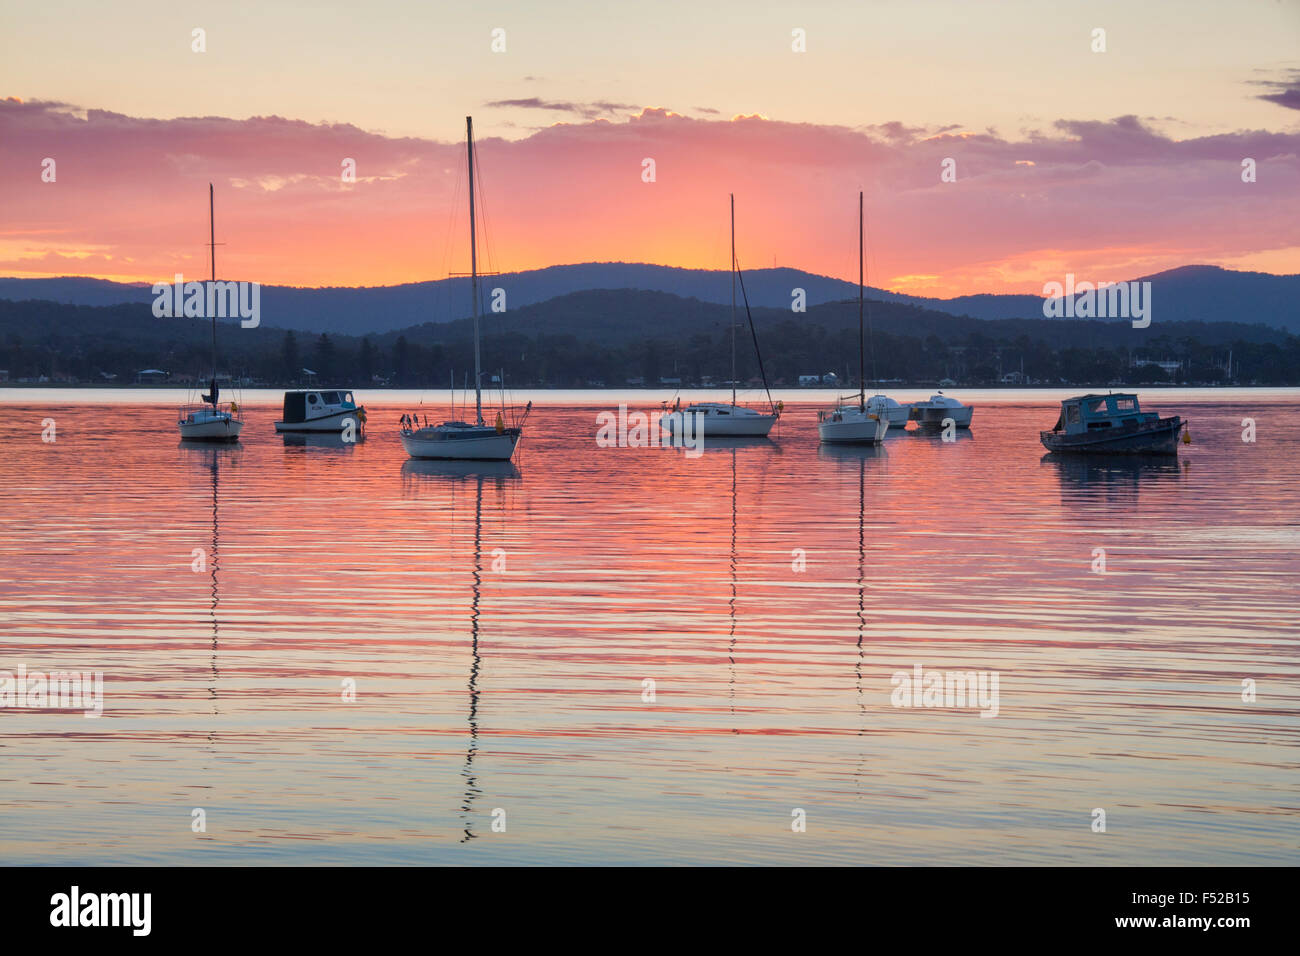 Lake Macquarie boats reflected in still water at sunset Watagan mountains in background New South Wales NSW Australia Stock Photo